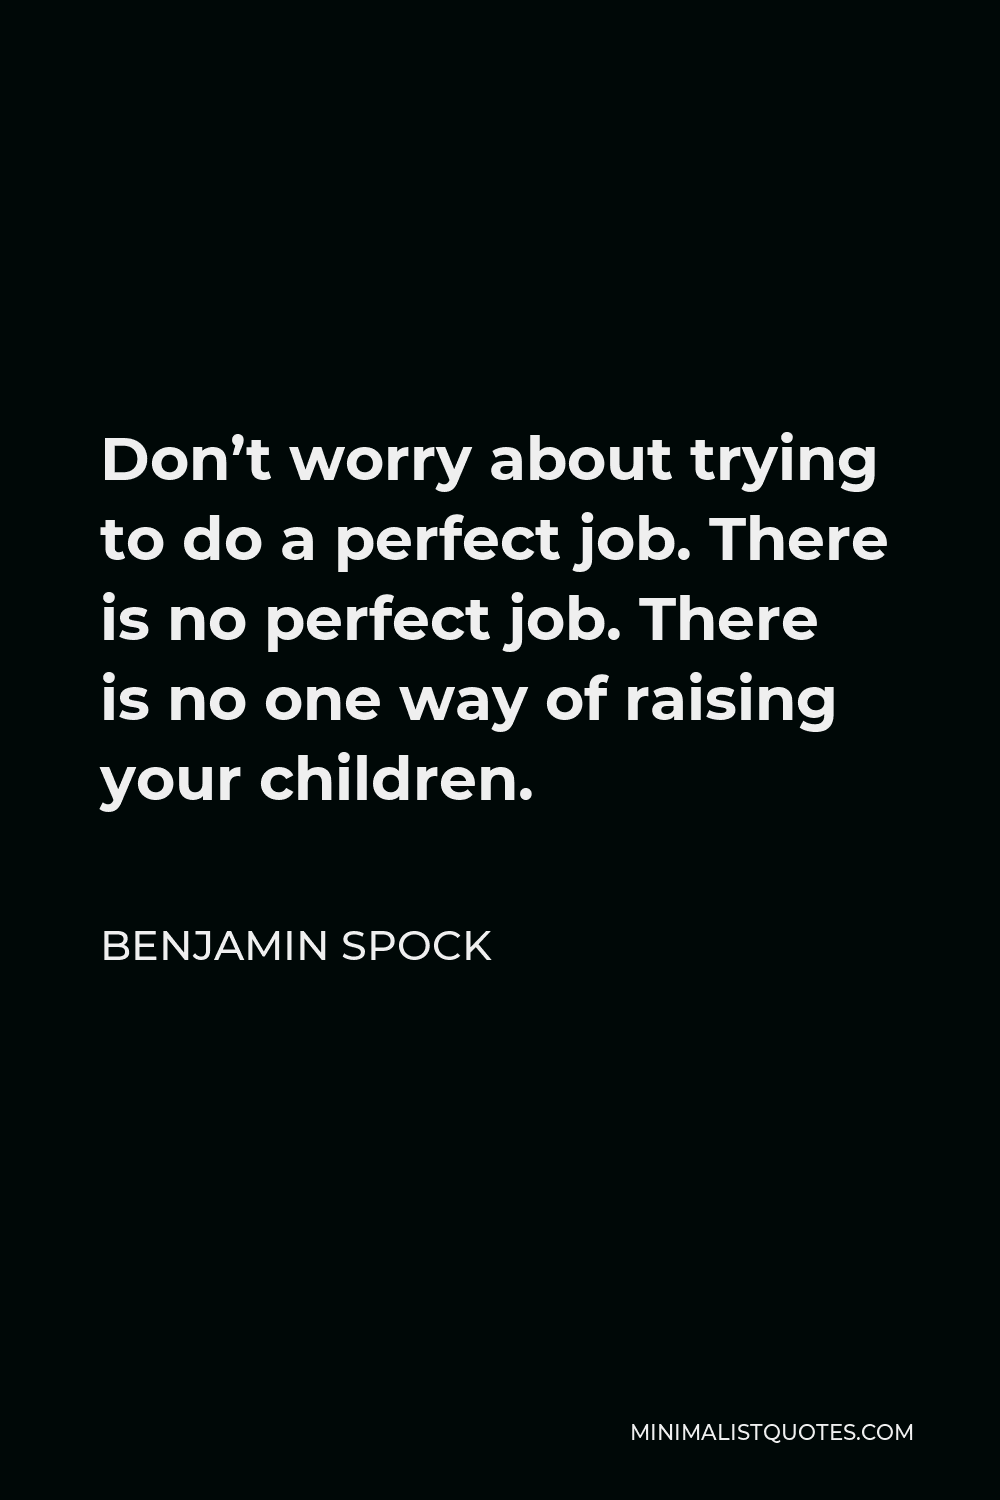 Benjamin Spock Quote - Don’t worry about trying to do a perfect job. There is no perfect job. There is no one way of raising your children.